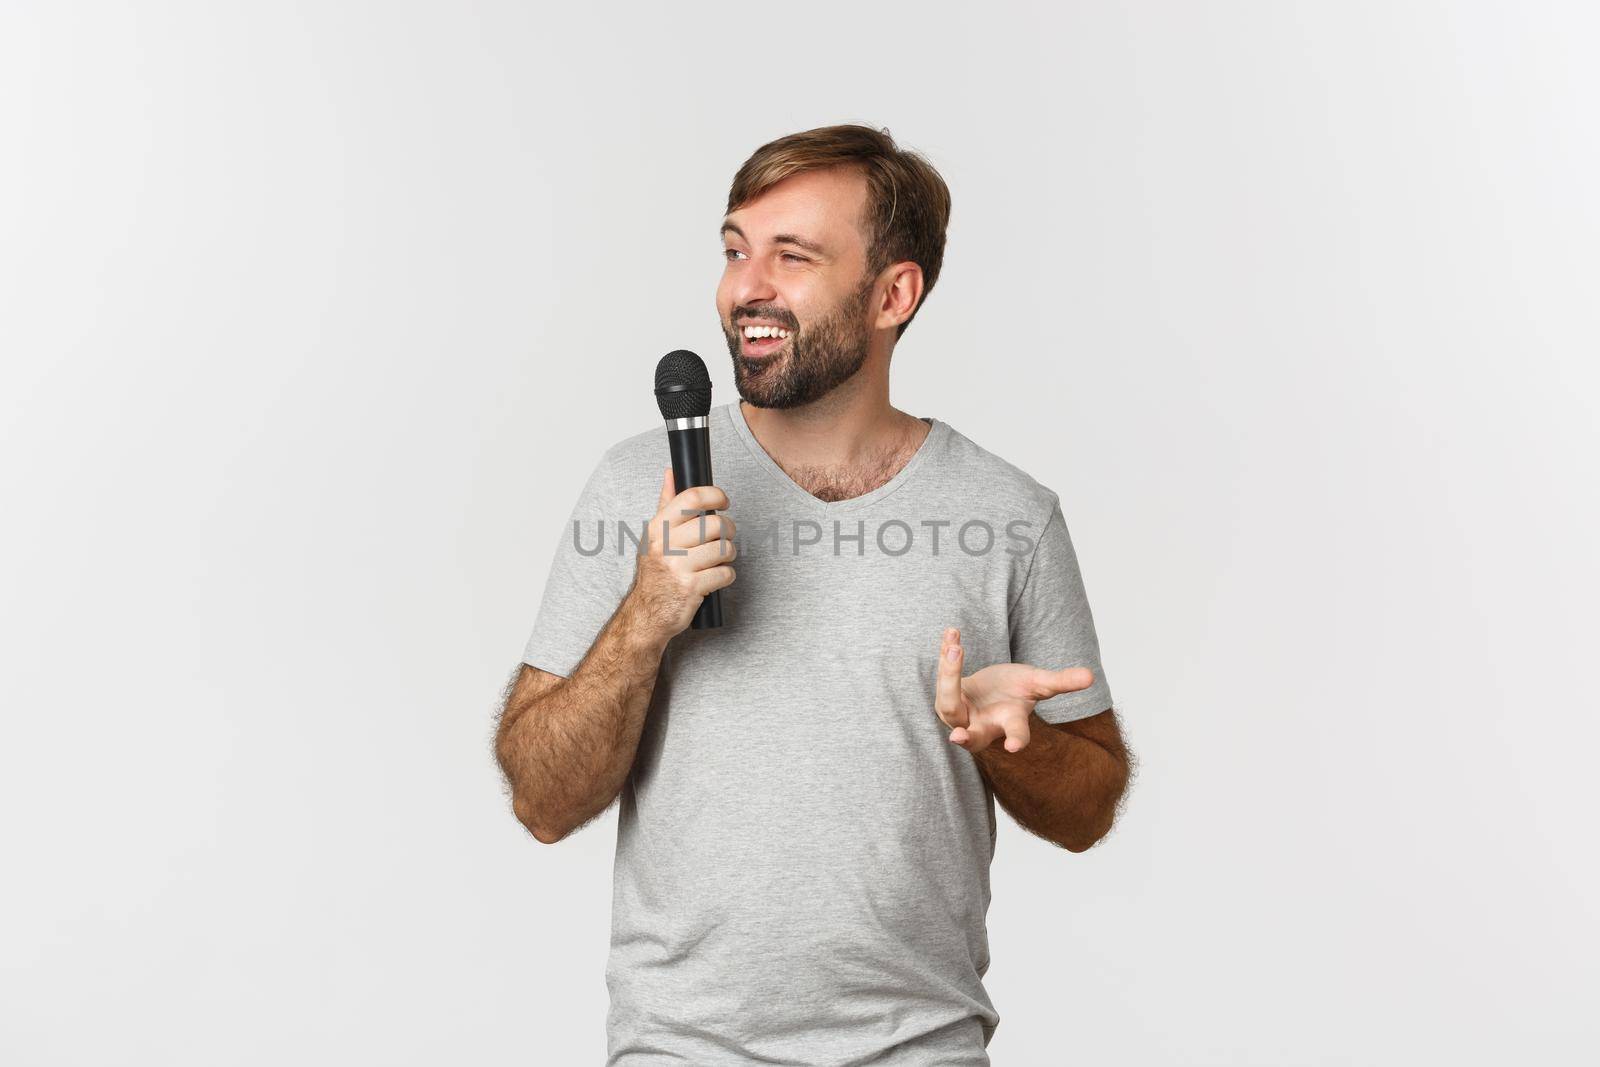 Image of charismatic male comedian in gray t-shirt making a speech, holding microphone and talking, standing over white background.